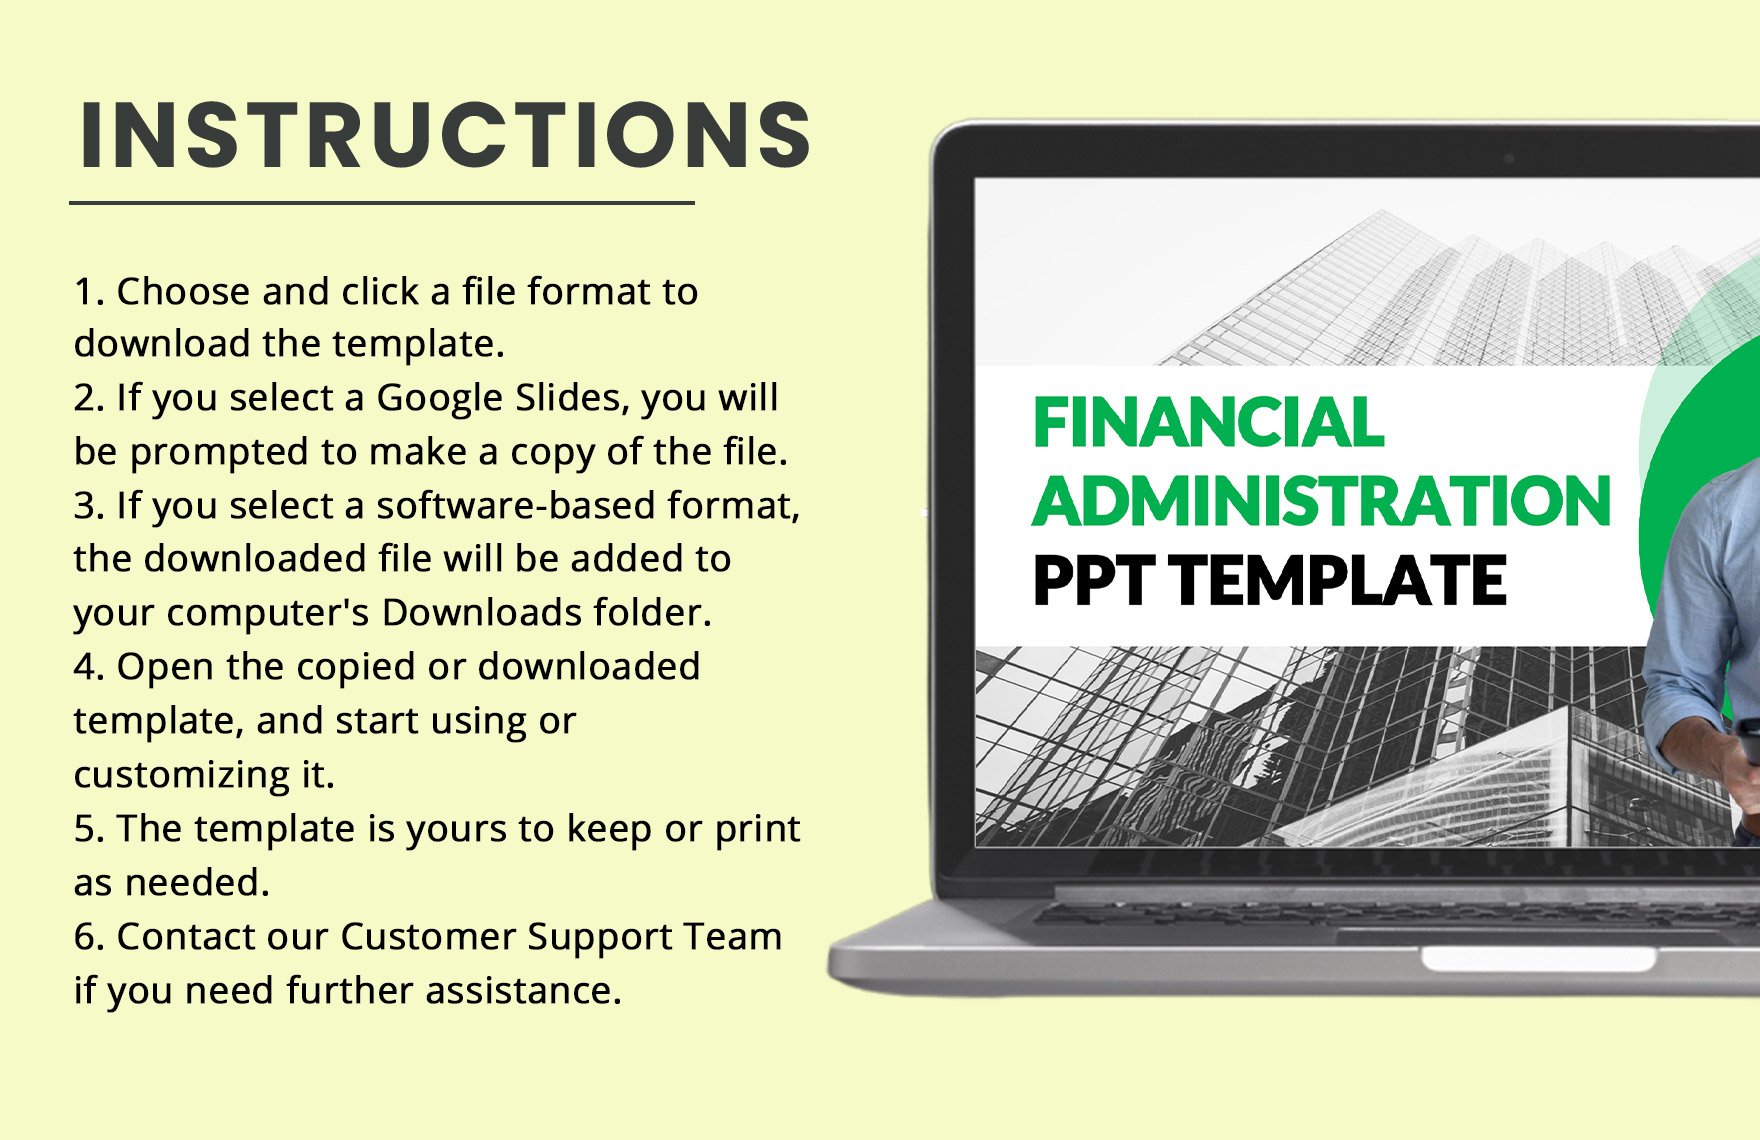 Financial Administration PPT Template